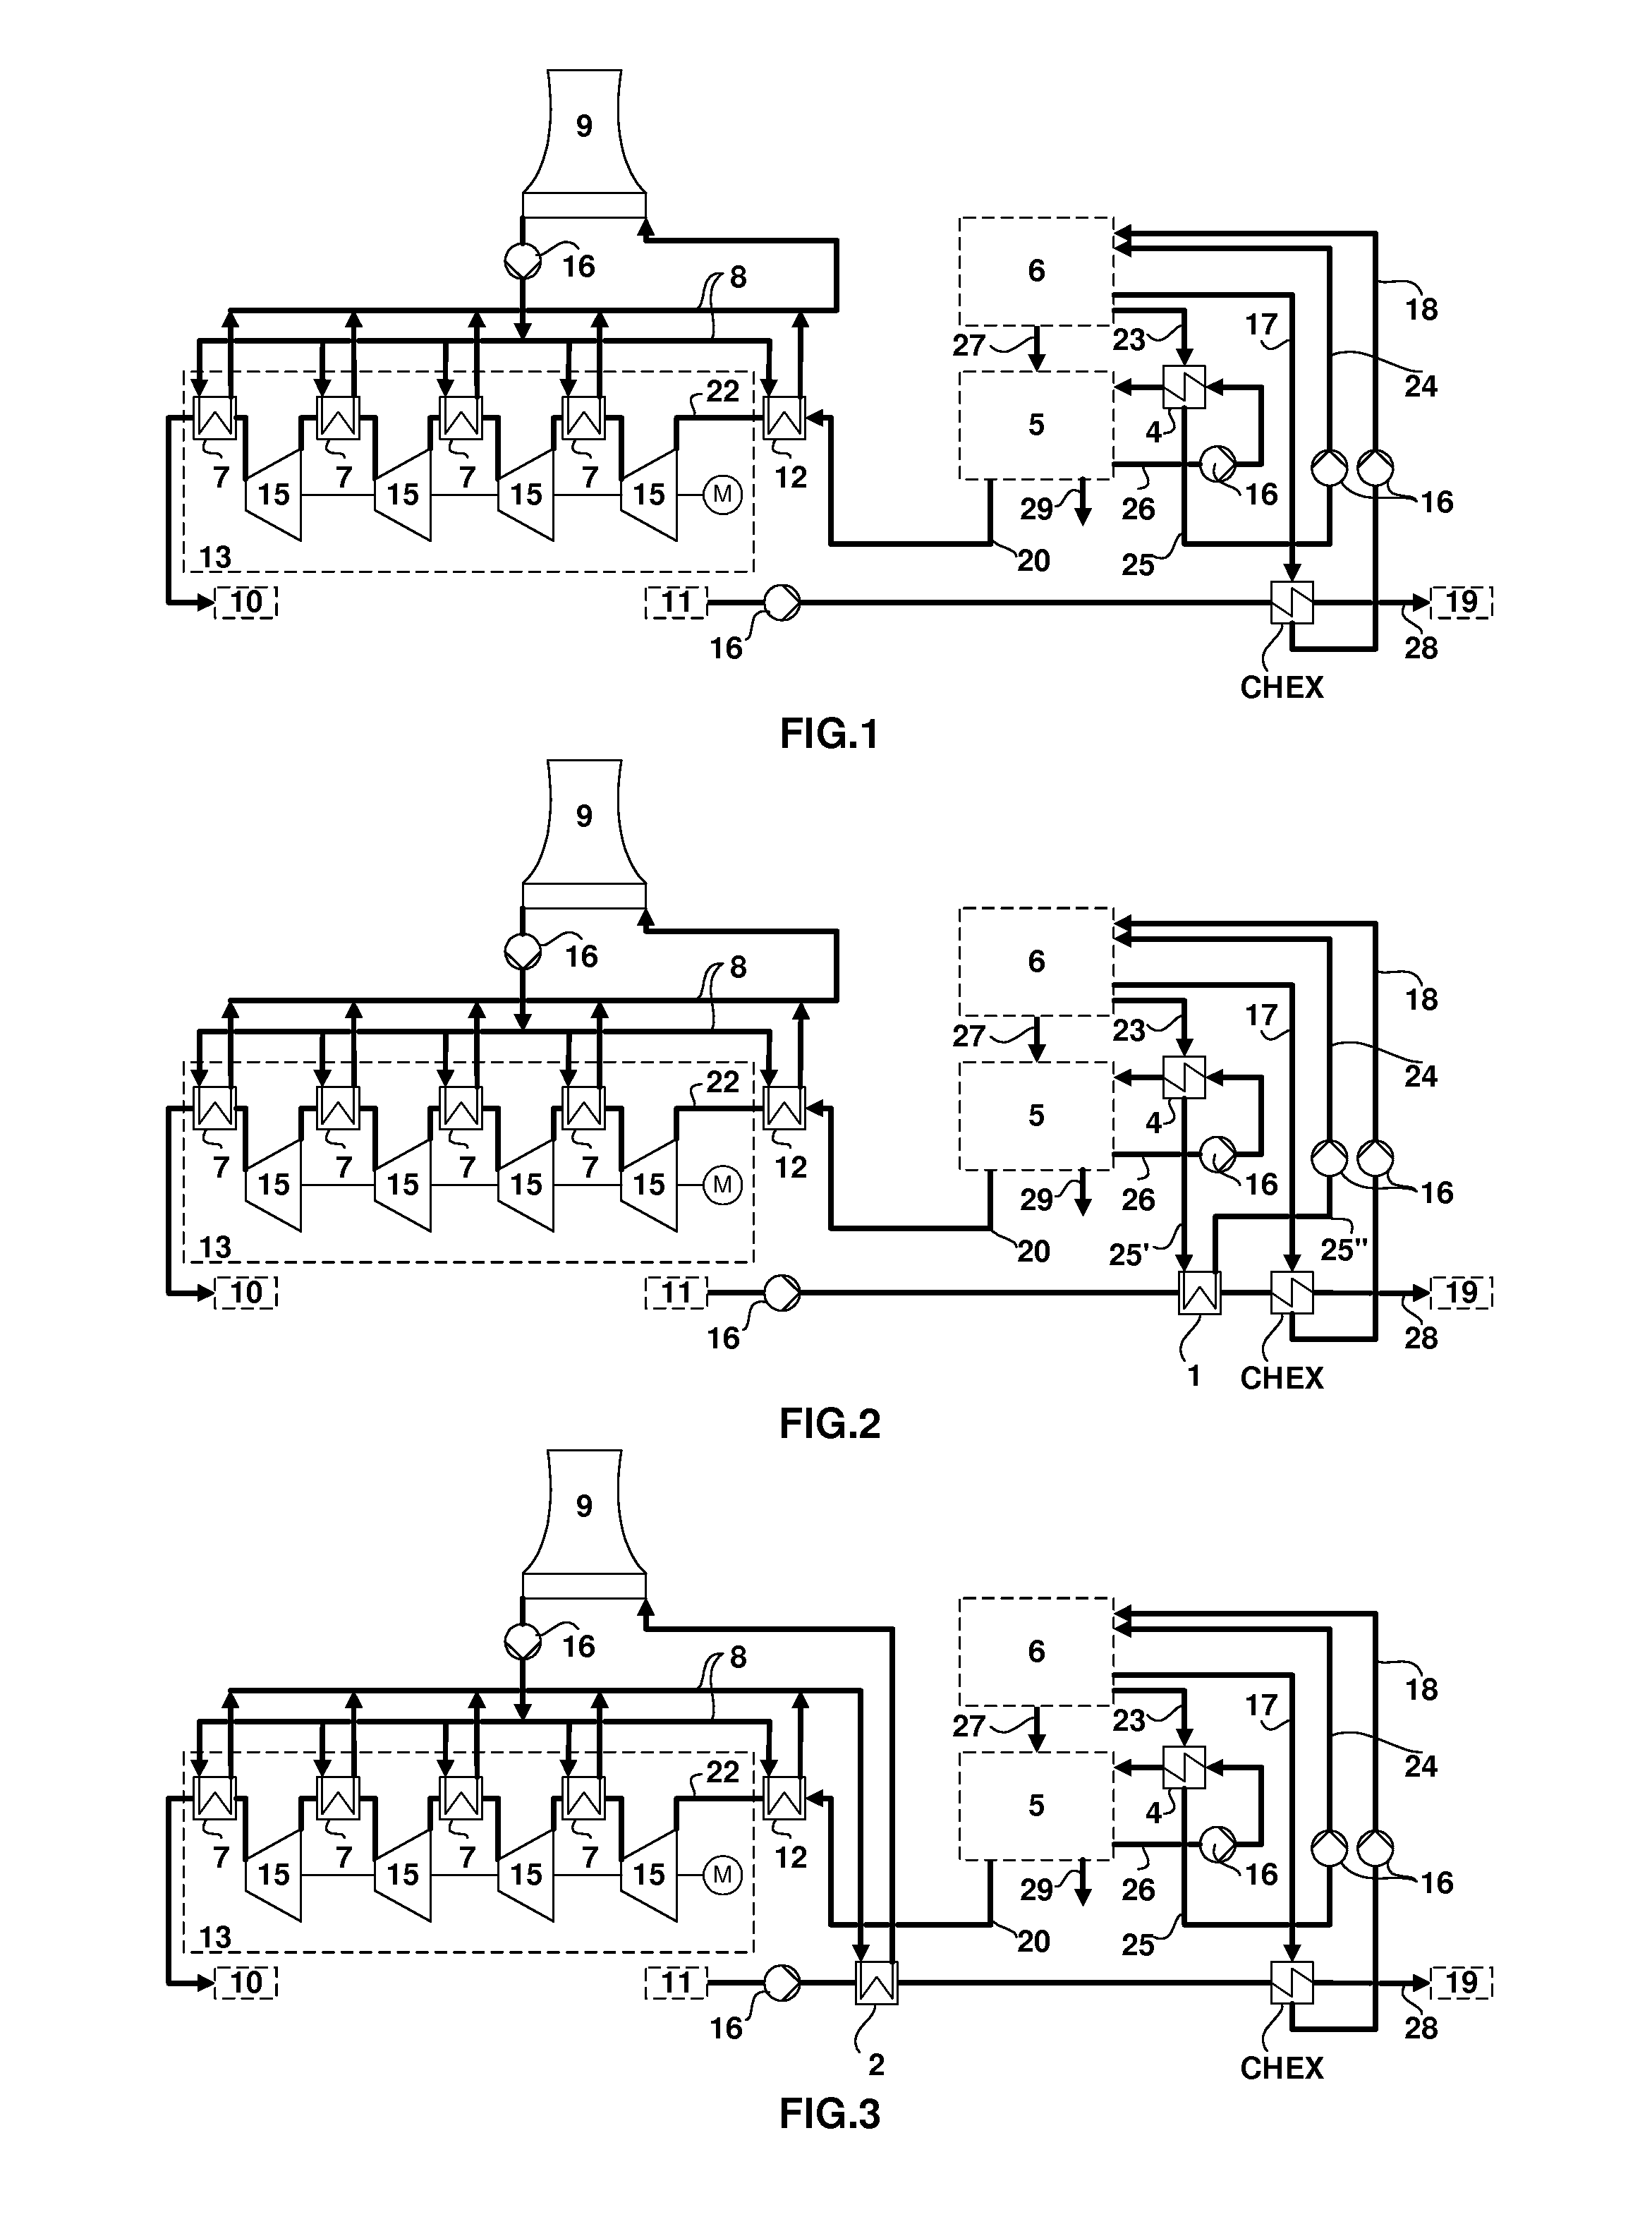 Thermal integration of a carbon dioxide capture and compression unit with a steam or combined cycle plant